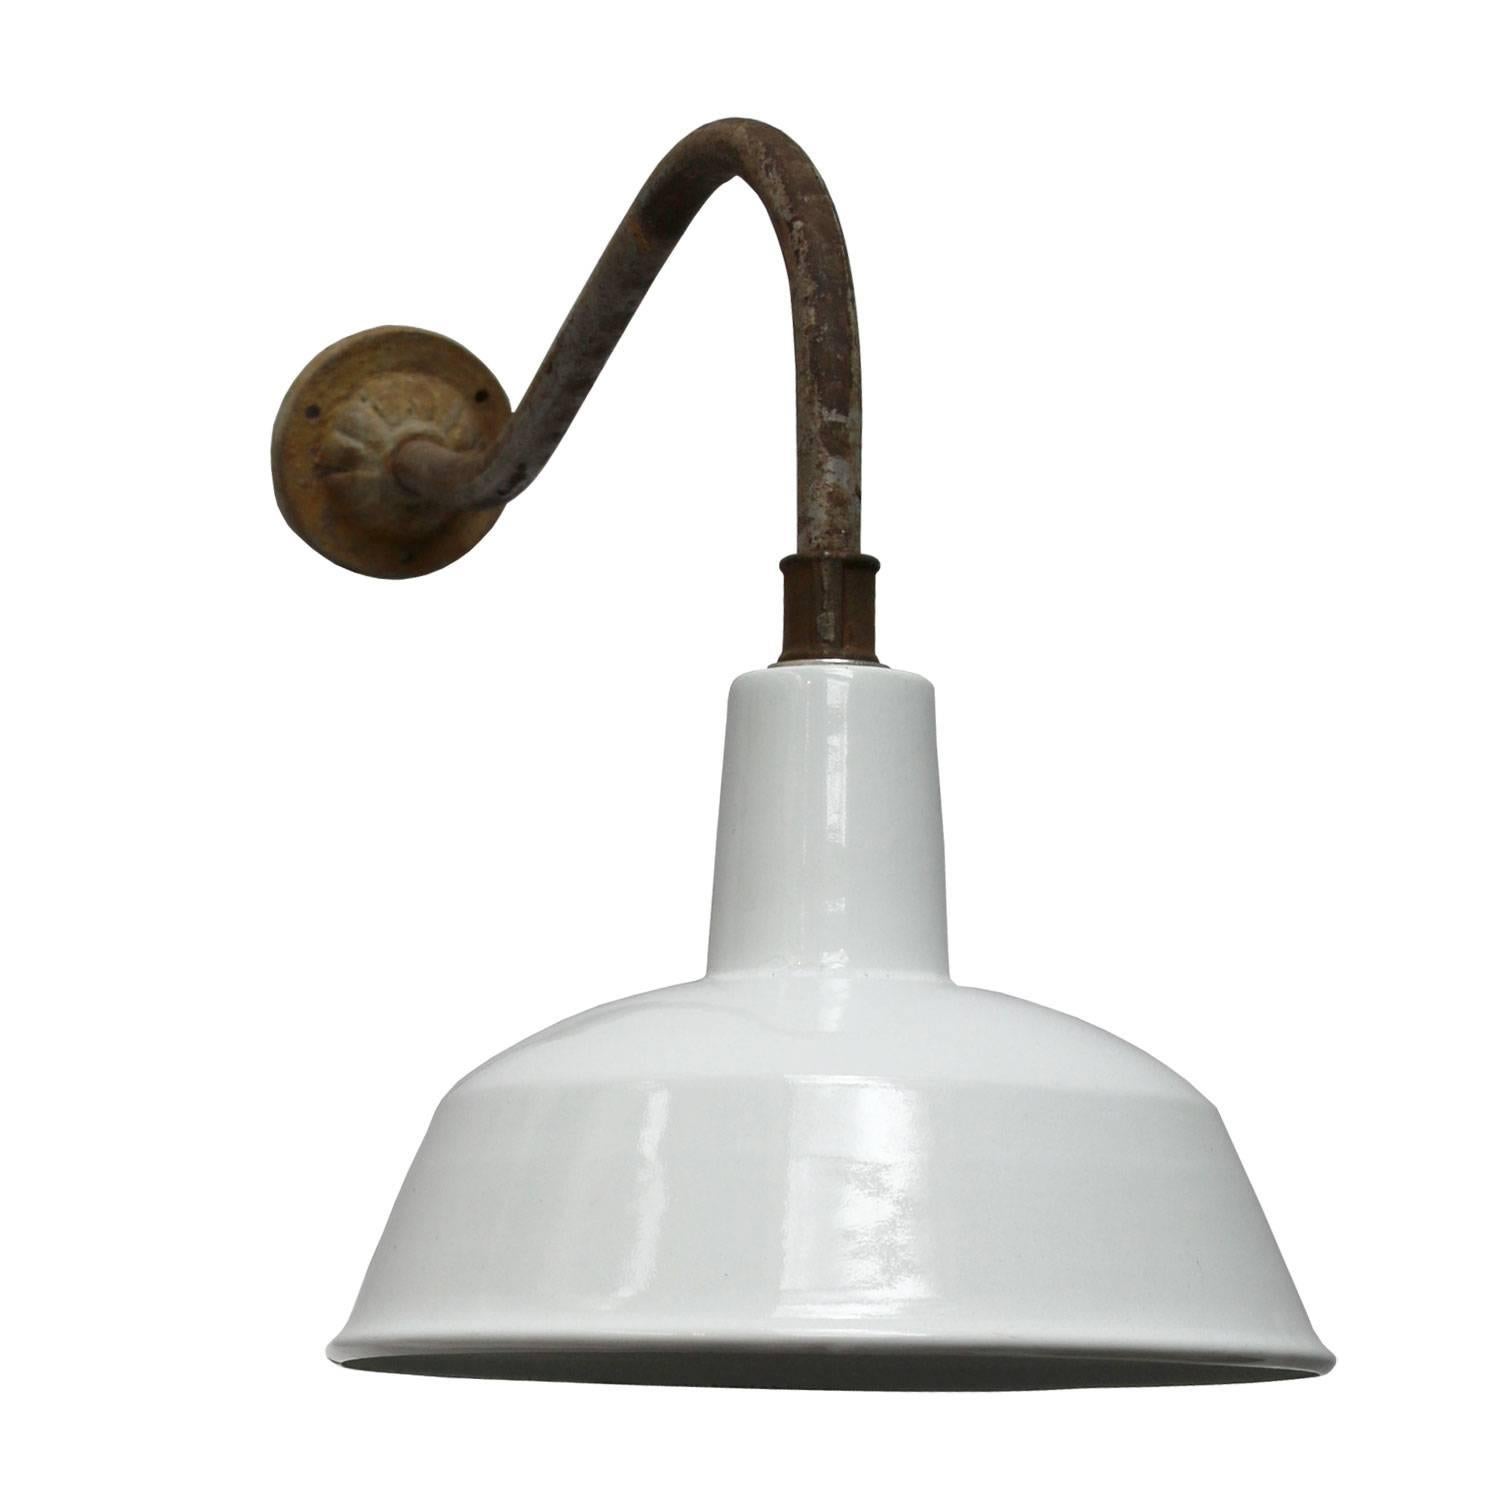 White enamel Industrial wall light with white interior.
Measures: Diameter cast iron wall mount 9 cm, 3 holes to secure.

Weight: 2.1 kg / 4.6 lb

All lamps have been made suitable by international standards for incandescent light bulbs,